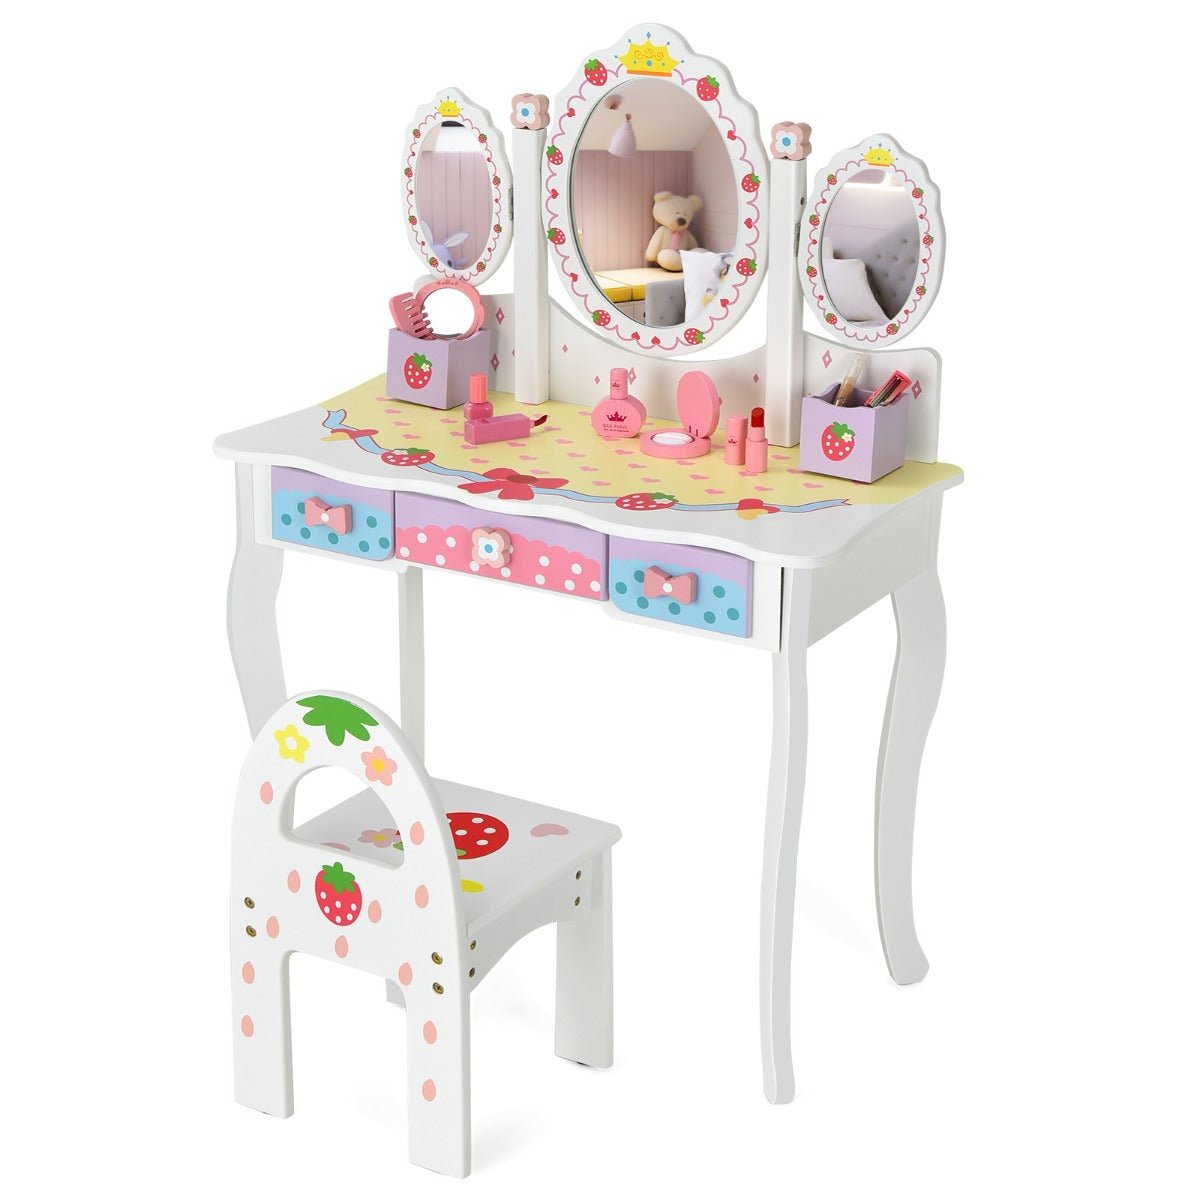 Children's Vanity Table with 360° Rotating Mirror - Playful Princess Elegance